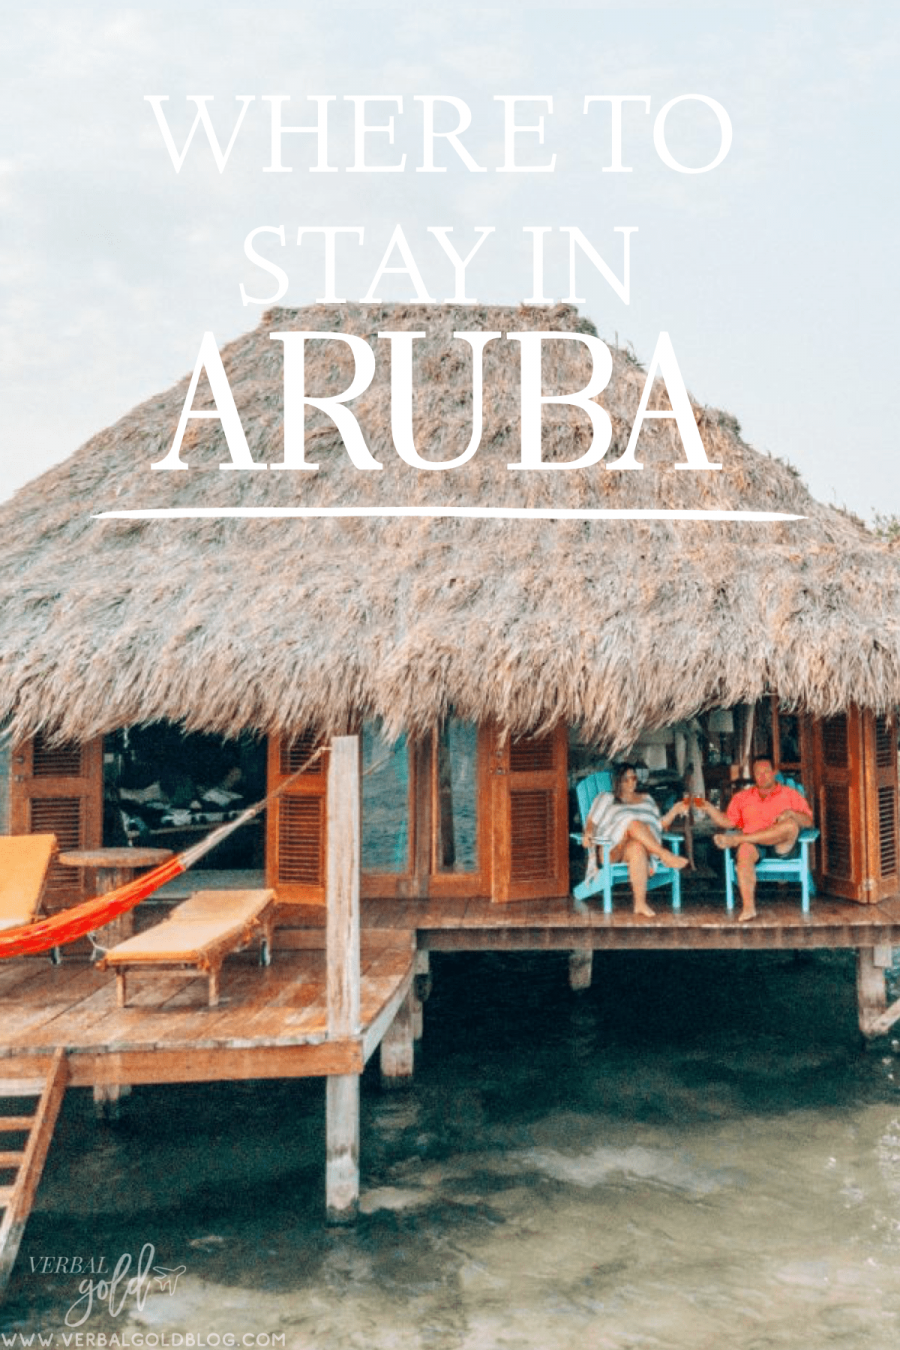 Wondering where to stay in Aruba? In this travel guide to Aruba, I share the best places to stay and tips to find the best hotels in the island